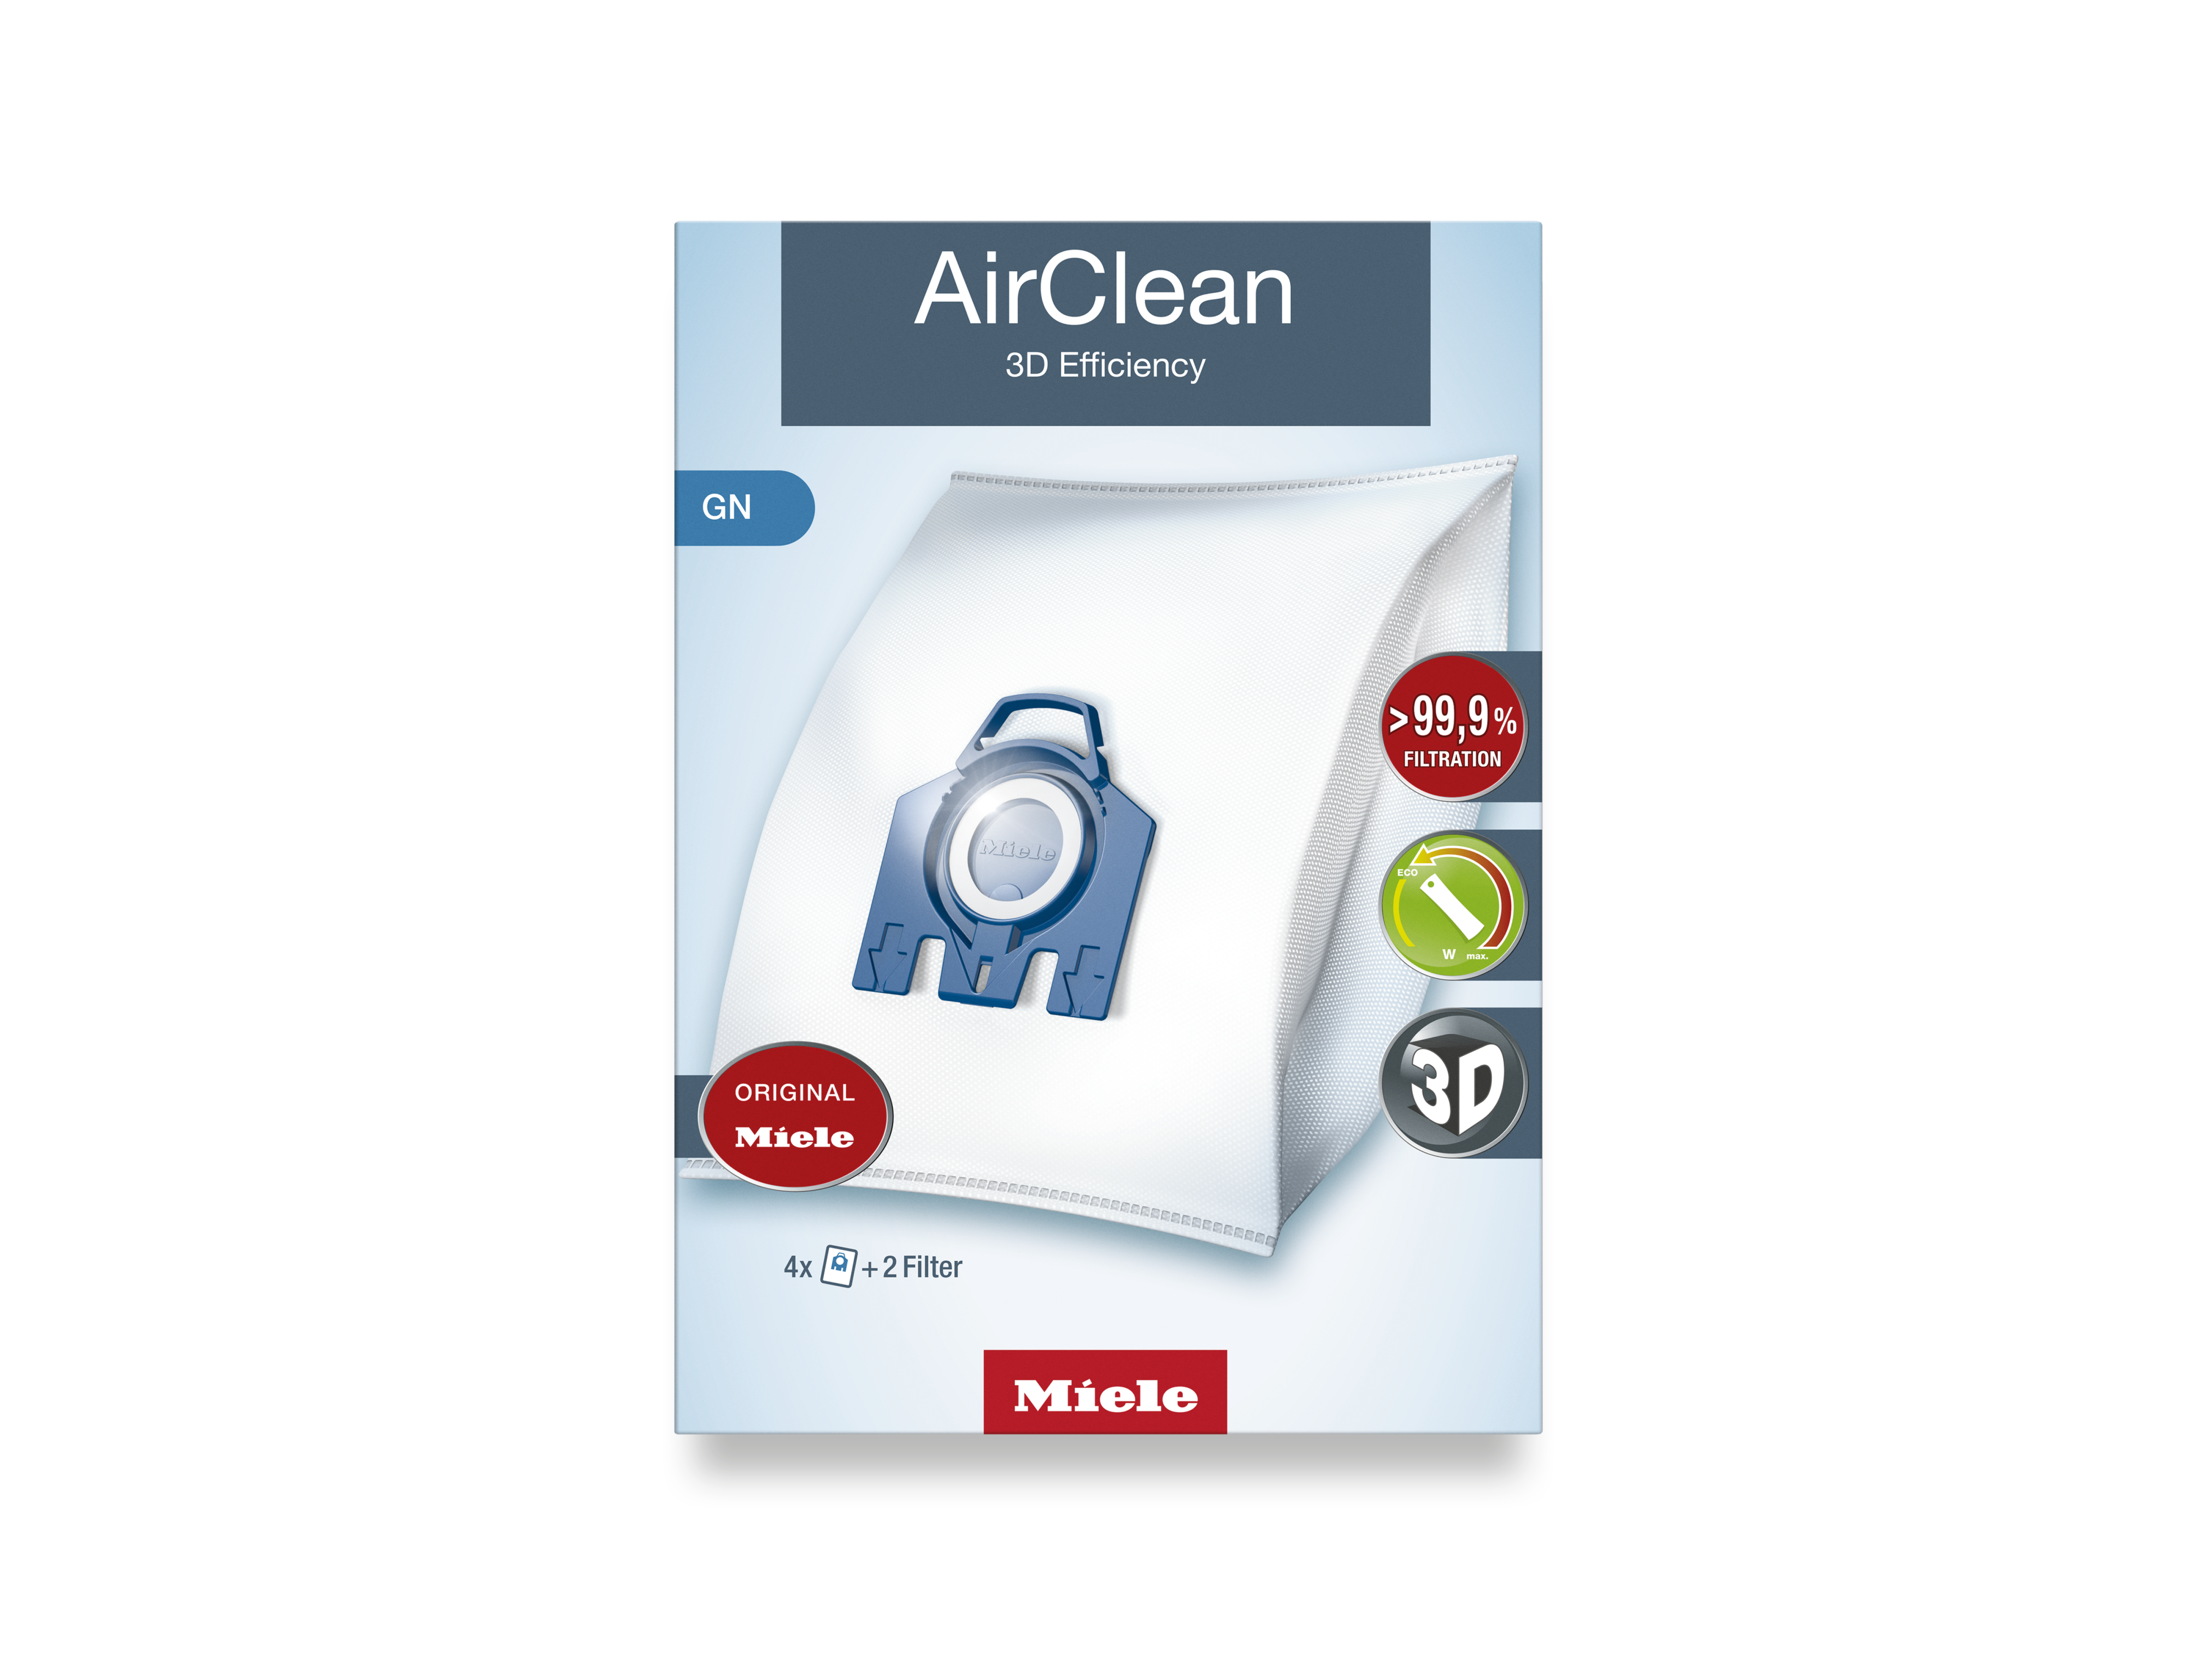 3D Efficiency Dust Bag For Miele Gn Vacuum 9917730 Hyclean Hoover Bags, 2  Tablets Air Clean And 2Tablets Motor Filter